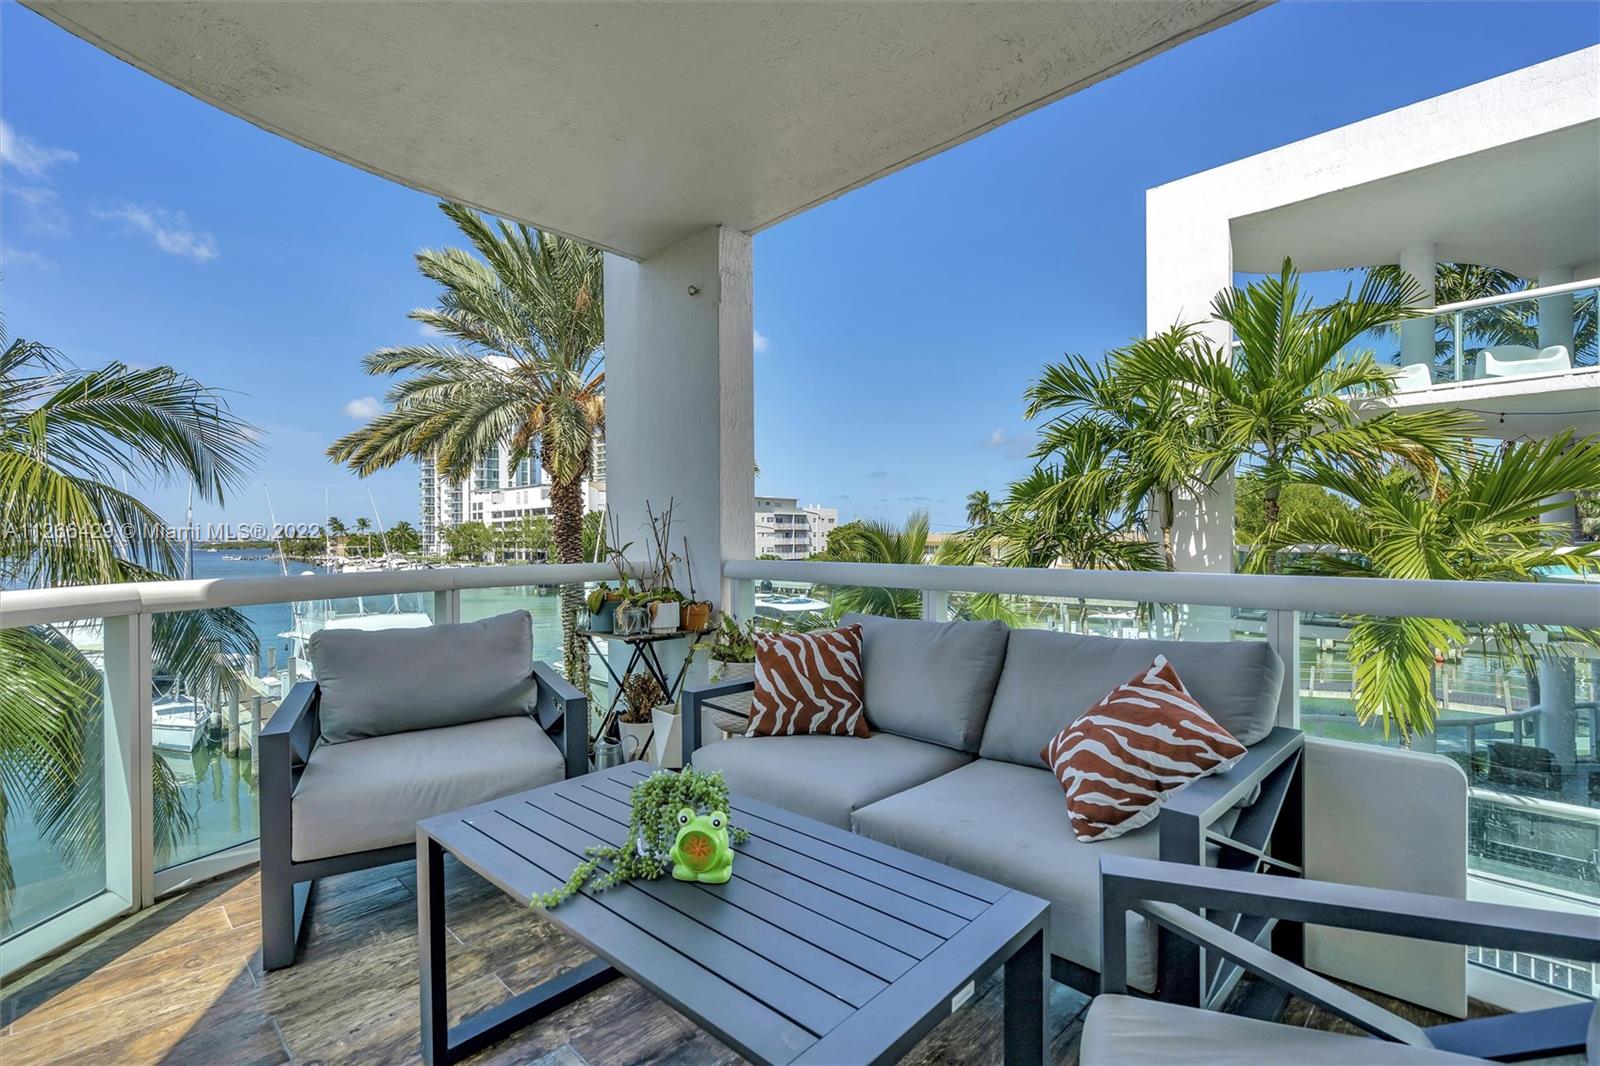 Cozy and functionally designed 3 bedroom and 2 baths, with top features of a modern and luxury kitchen, ceramic wood tile on the courteous balcony that allows evening entertainment space for family and friends overseeing Florida views - the yachts, the water, the palm trees, and the Magic City sky! The property includes two parking spots, one in the garage and one outside, and a valet service with the main 360 Condominium building. The quietness of the island mixed with proximity to locations like Aventura, Bal Harbor, South Beach, Downtown/Brickell, and Wynwood is perfect for those who are looking to have a quiet place and accessibility and diversity of entertainment and restaurants. There is currently ongoing construction of Publix on the second island.